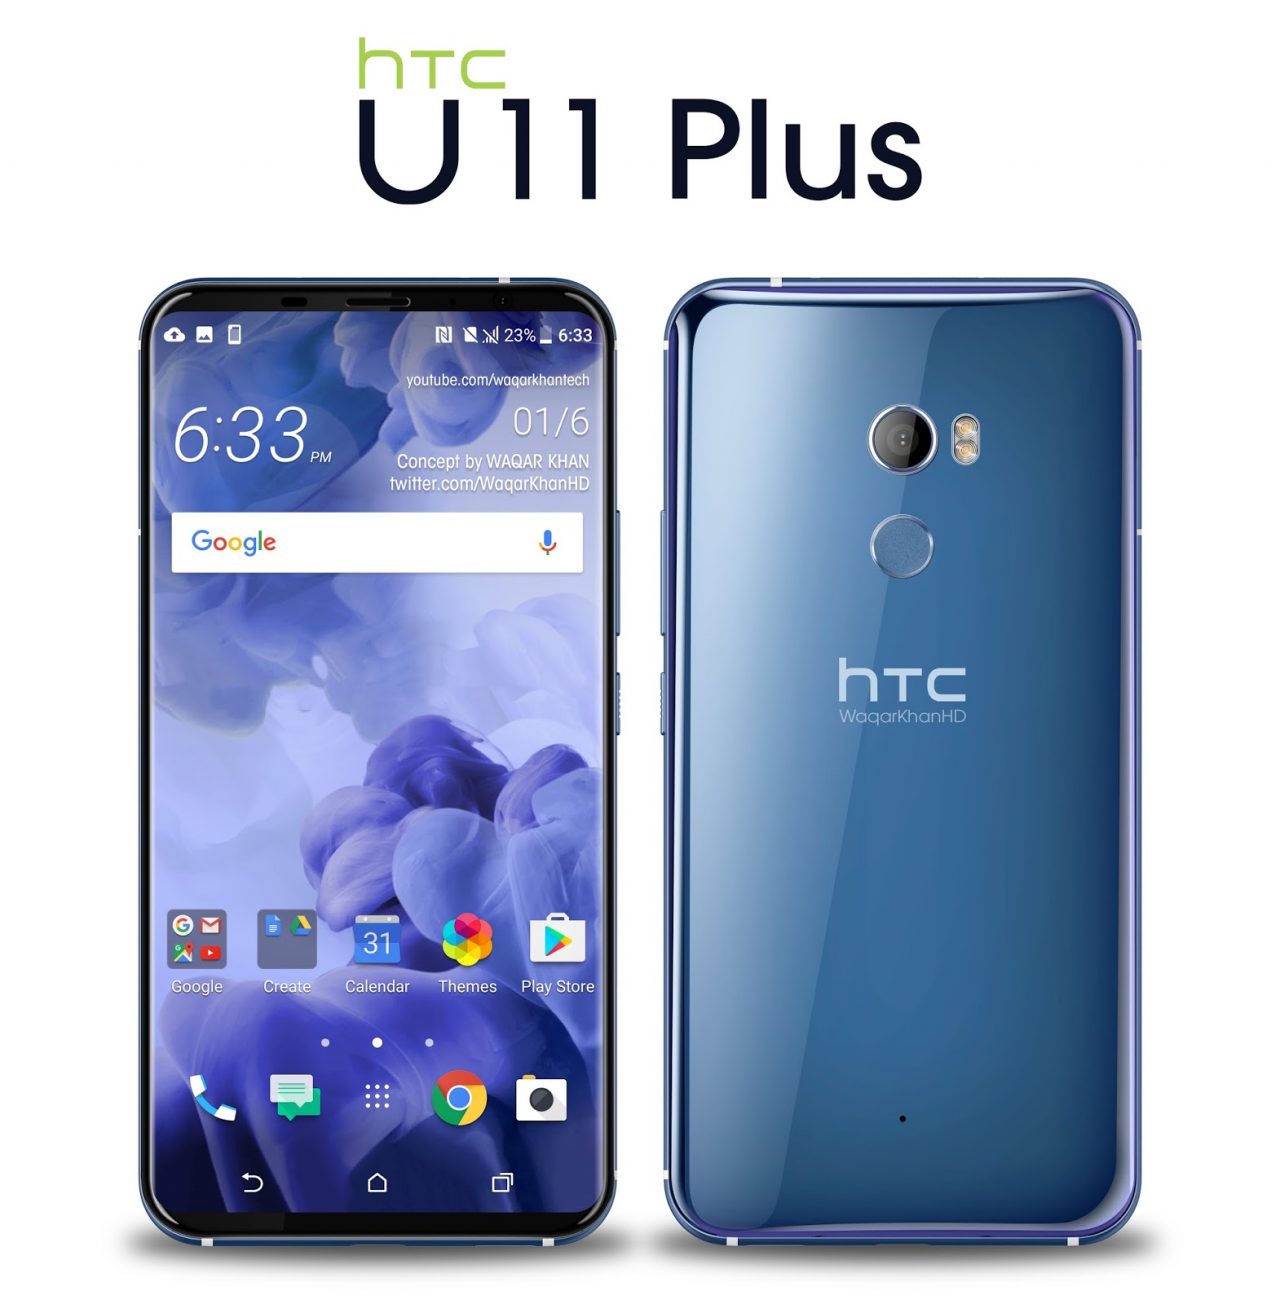 HTC U11 Plus might be coming out in Q4 2017